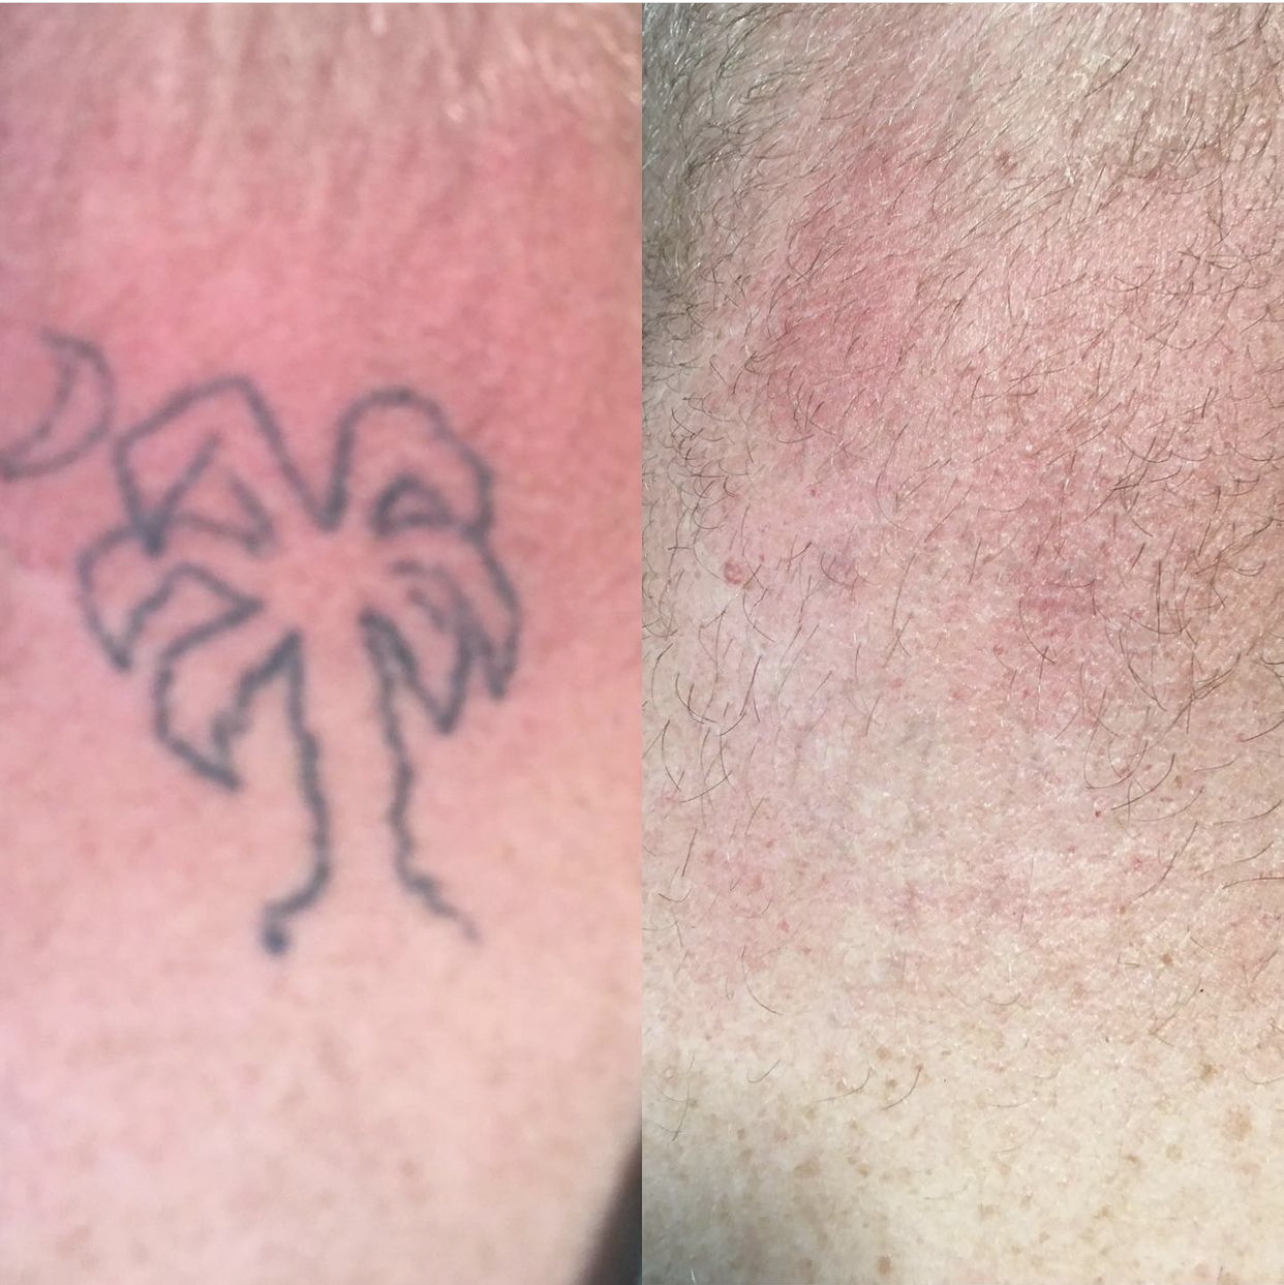 All Your Tattoo Removal Questions, Answered | RealSelf